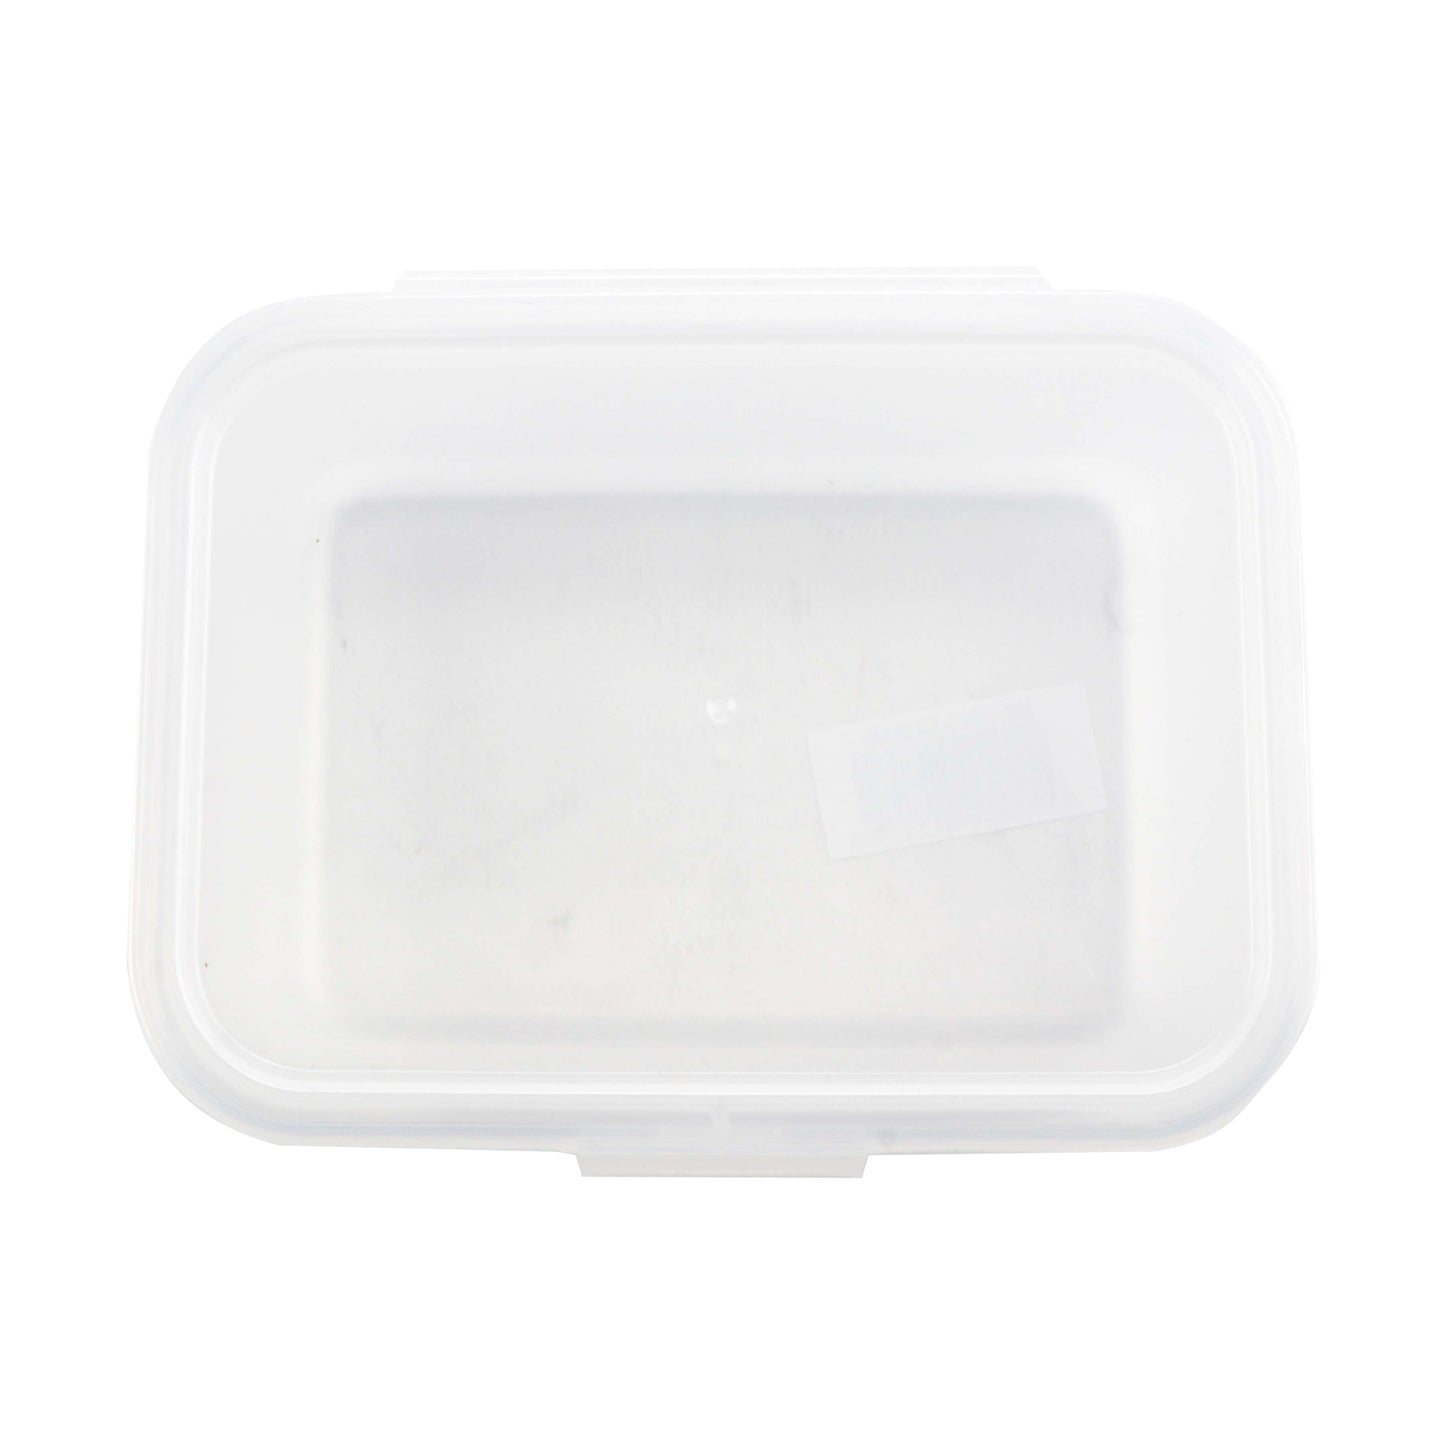 17 oz Hinged Lid Container 6.6" x 5" x 1.75" GET, Eco-Takeouts (500 ml) (12 Pack)